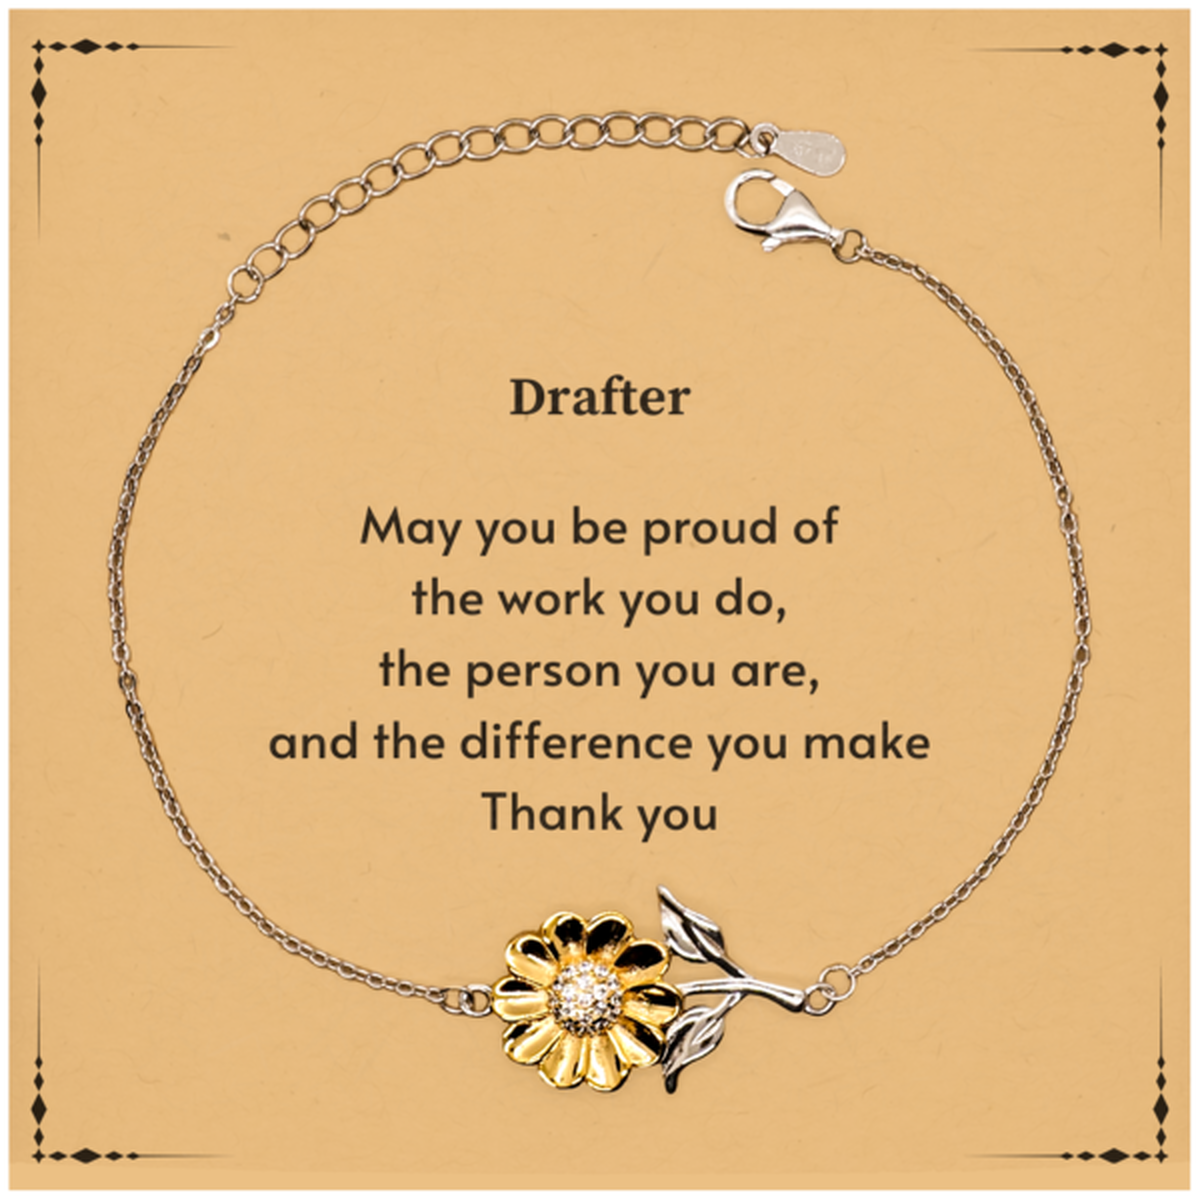 Heartwarming Sunflower Bracelet Retirement Coworkers Gifts for Drafter, Drafter May You be proud of the work you do, the person you are Gifts for Boss Men Women Friends